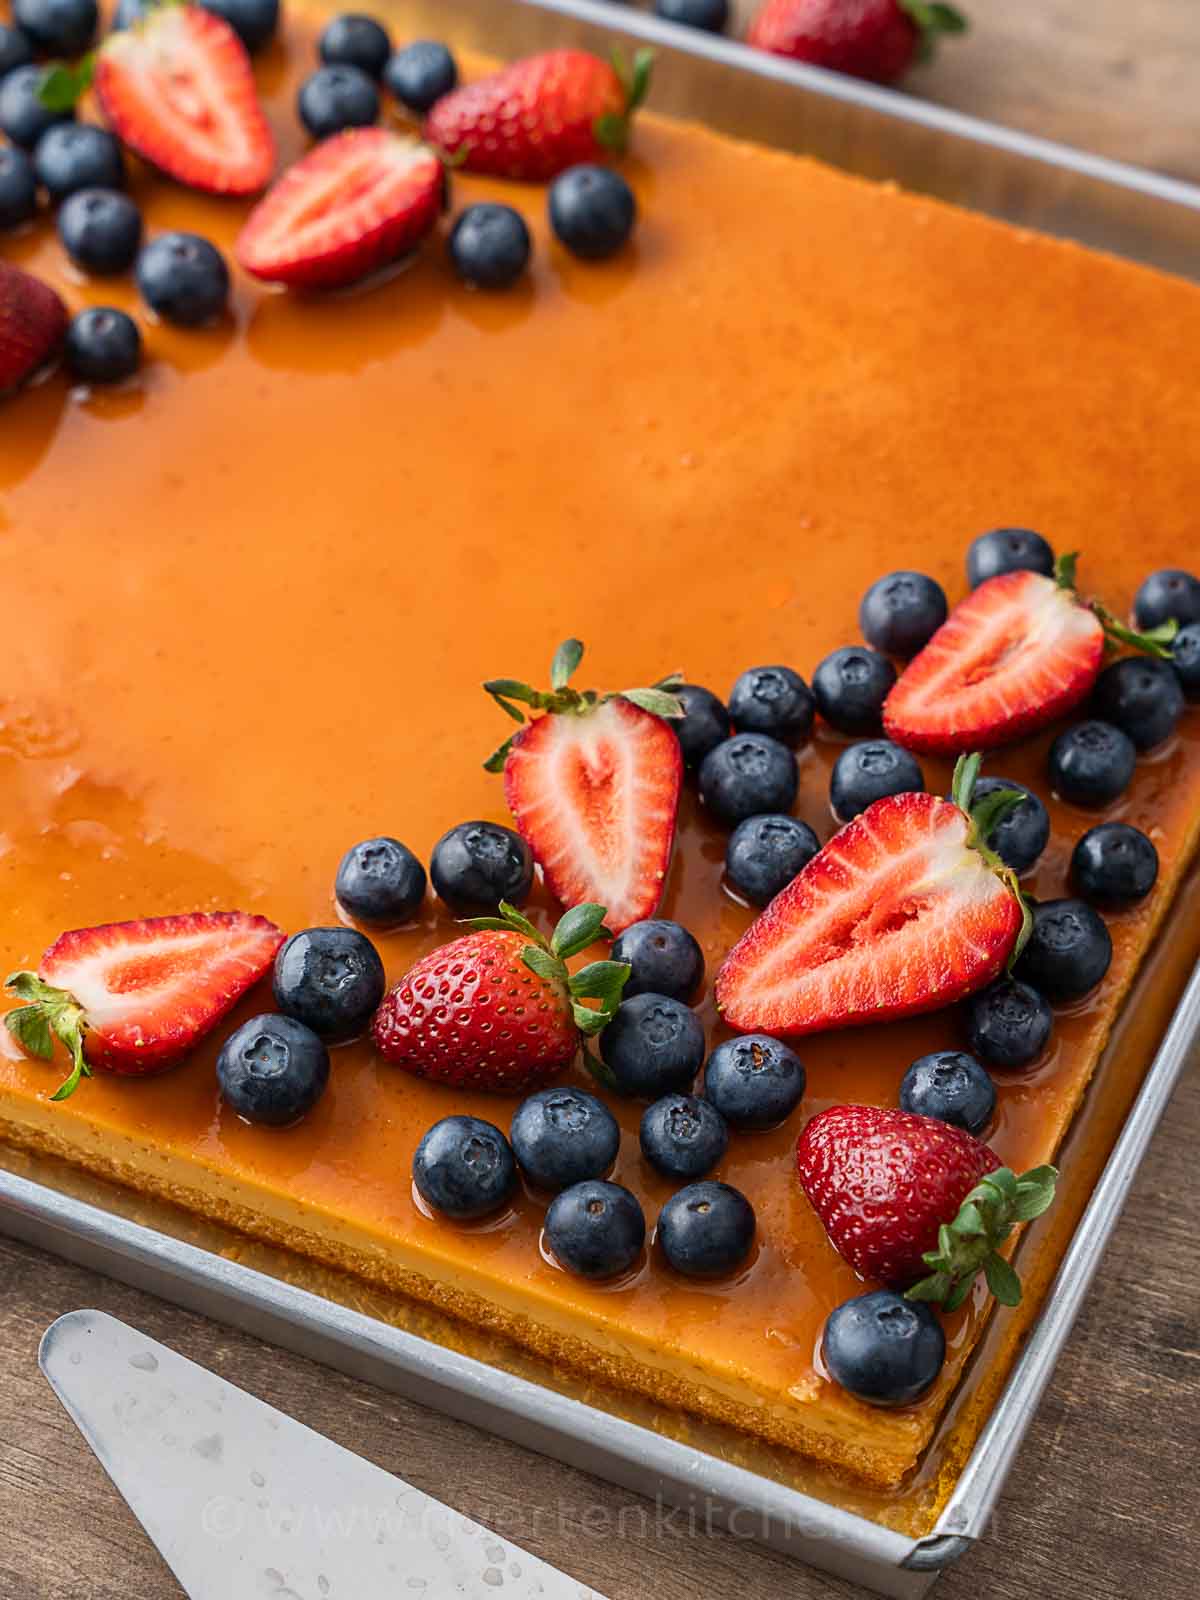 flan cake with strawberries and blueberries.